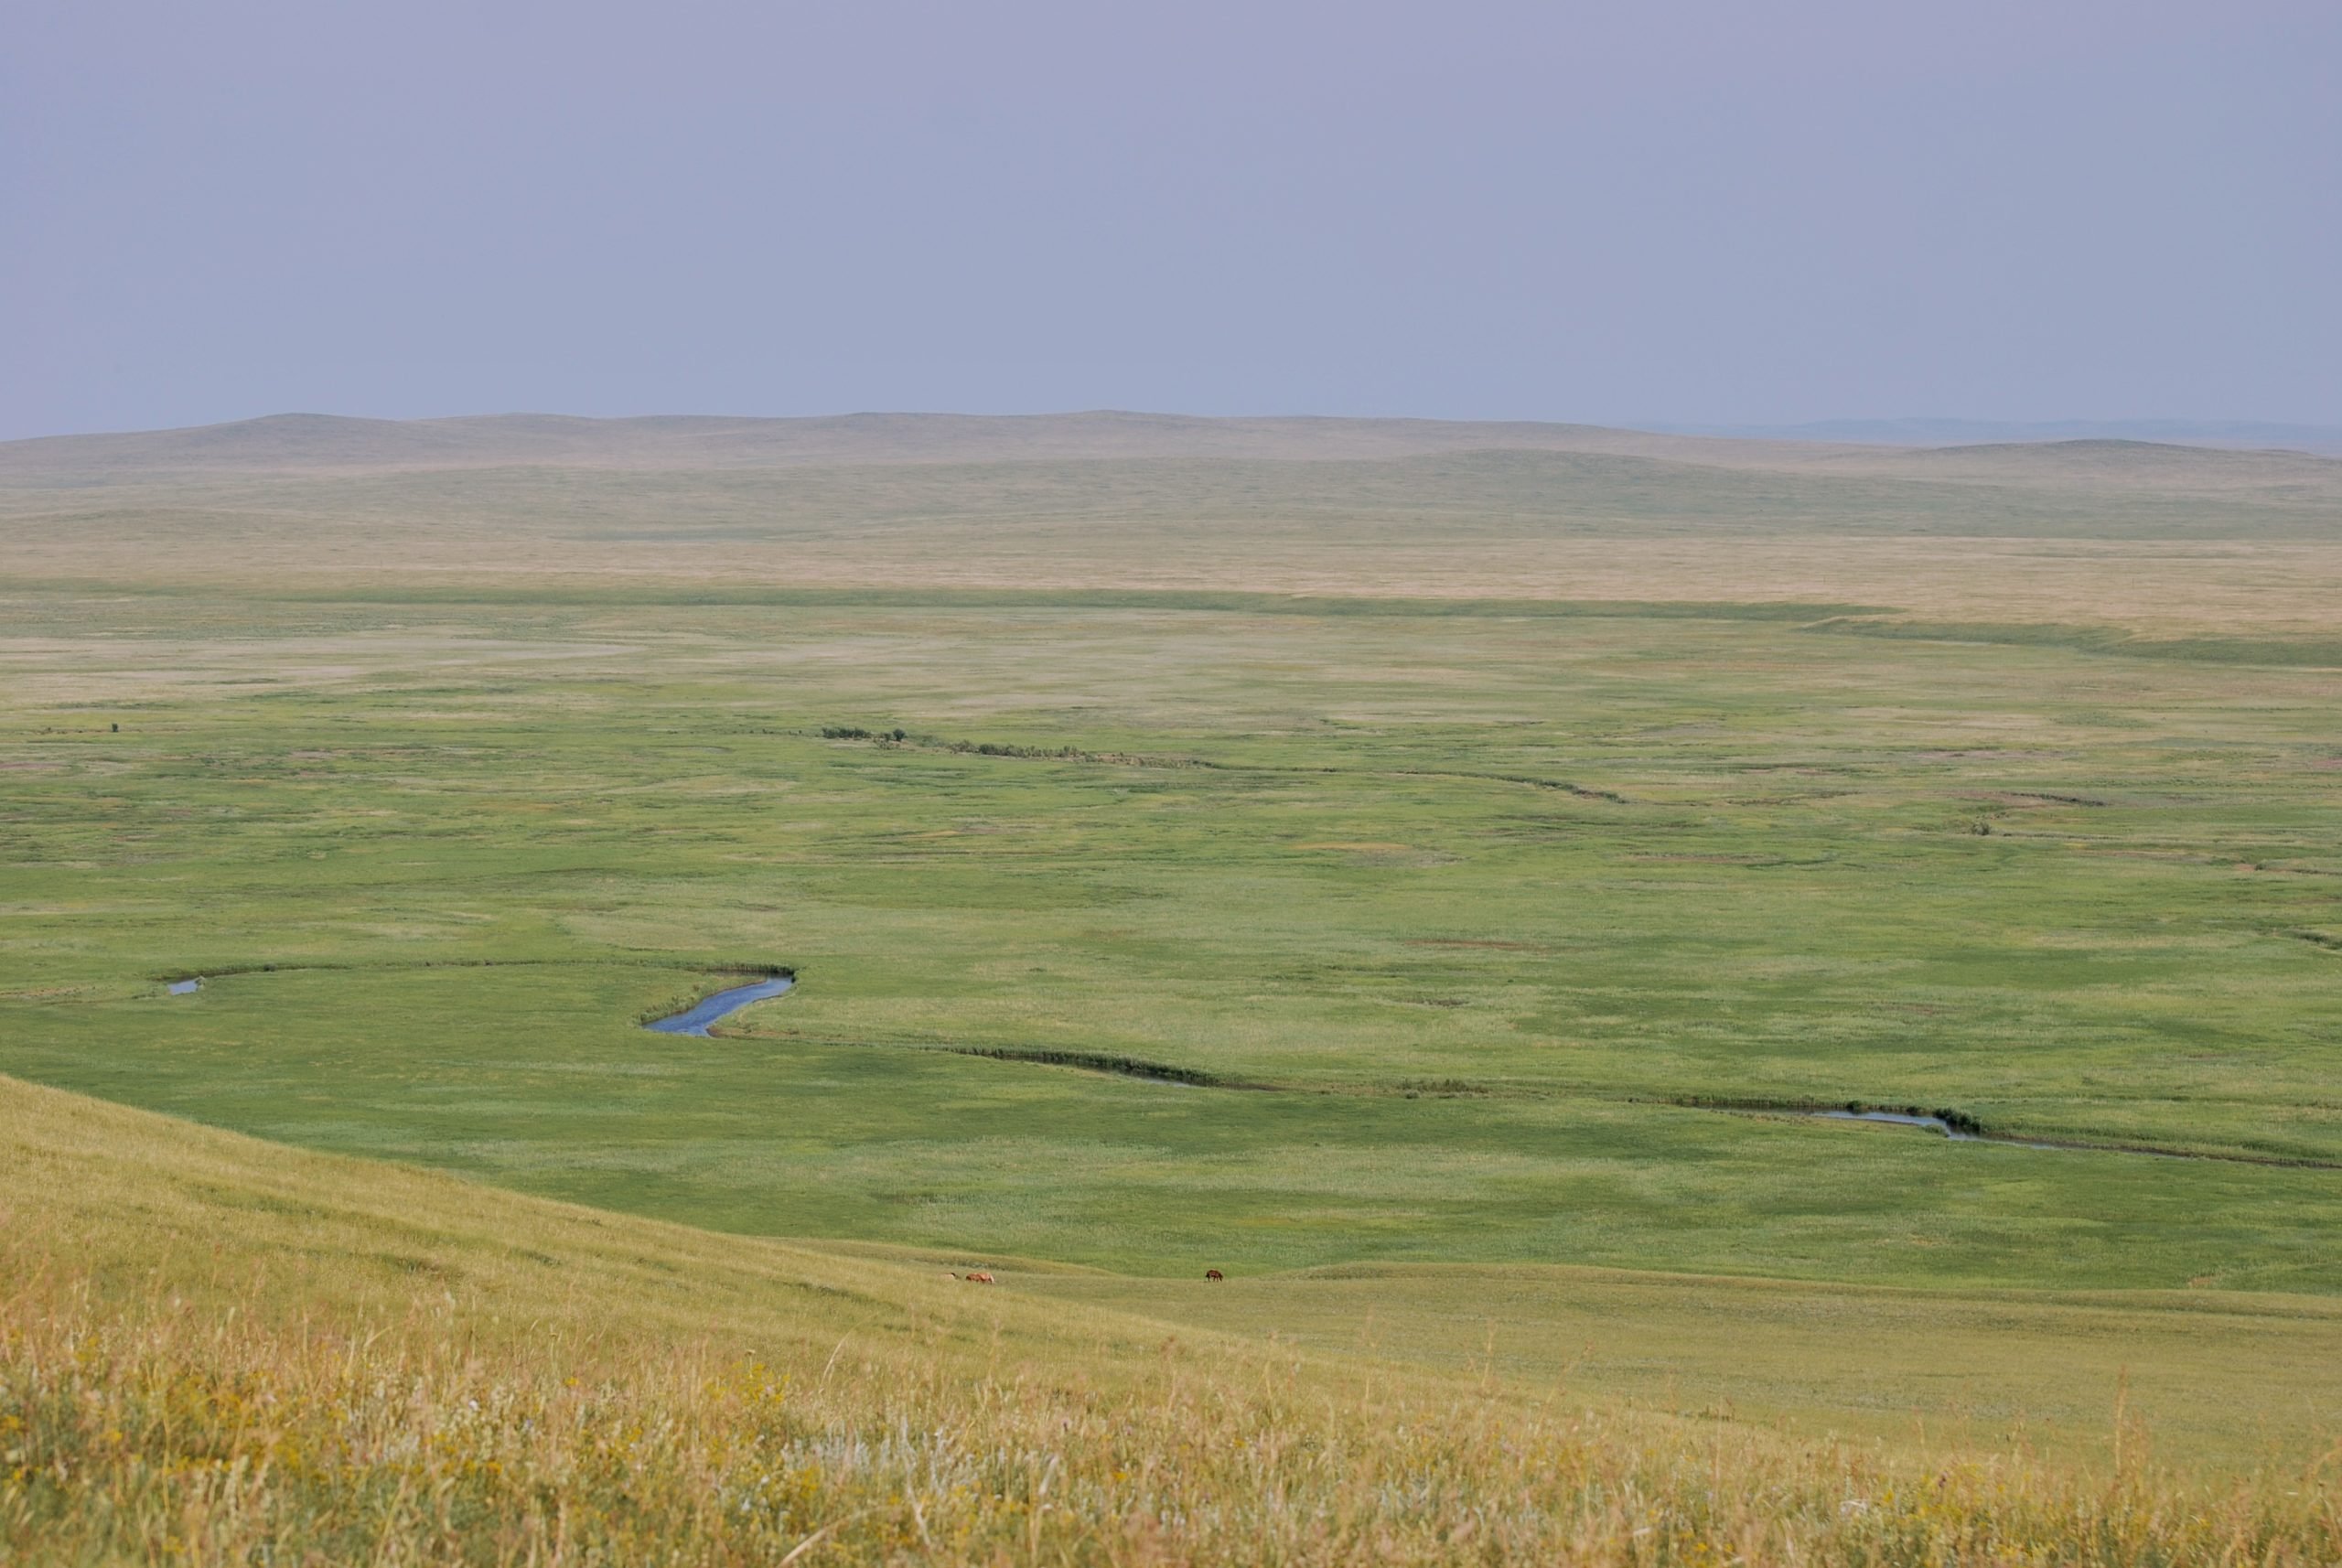 View of the Ulz River from the Eltrud Hills, a section of the Dornod Mongol Strictly Protected Area in eastern Mongolia